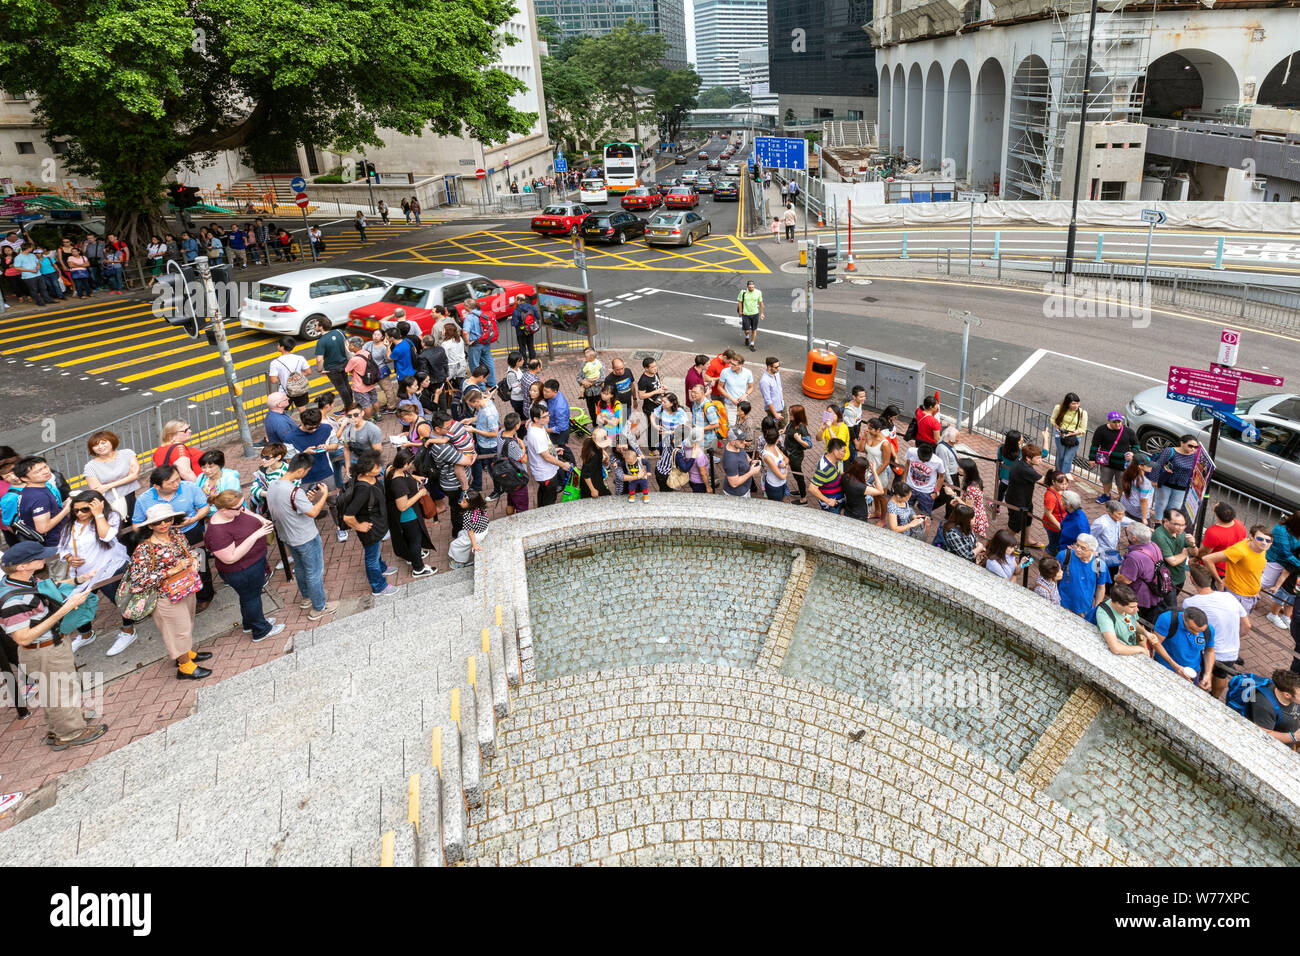 People in queue for Peak Tram, Central, Hong Kong, SAR, China Stock Photo